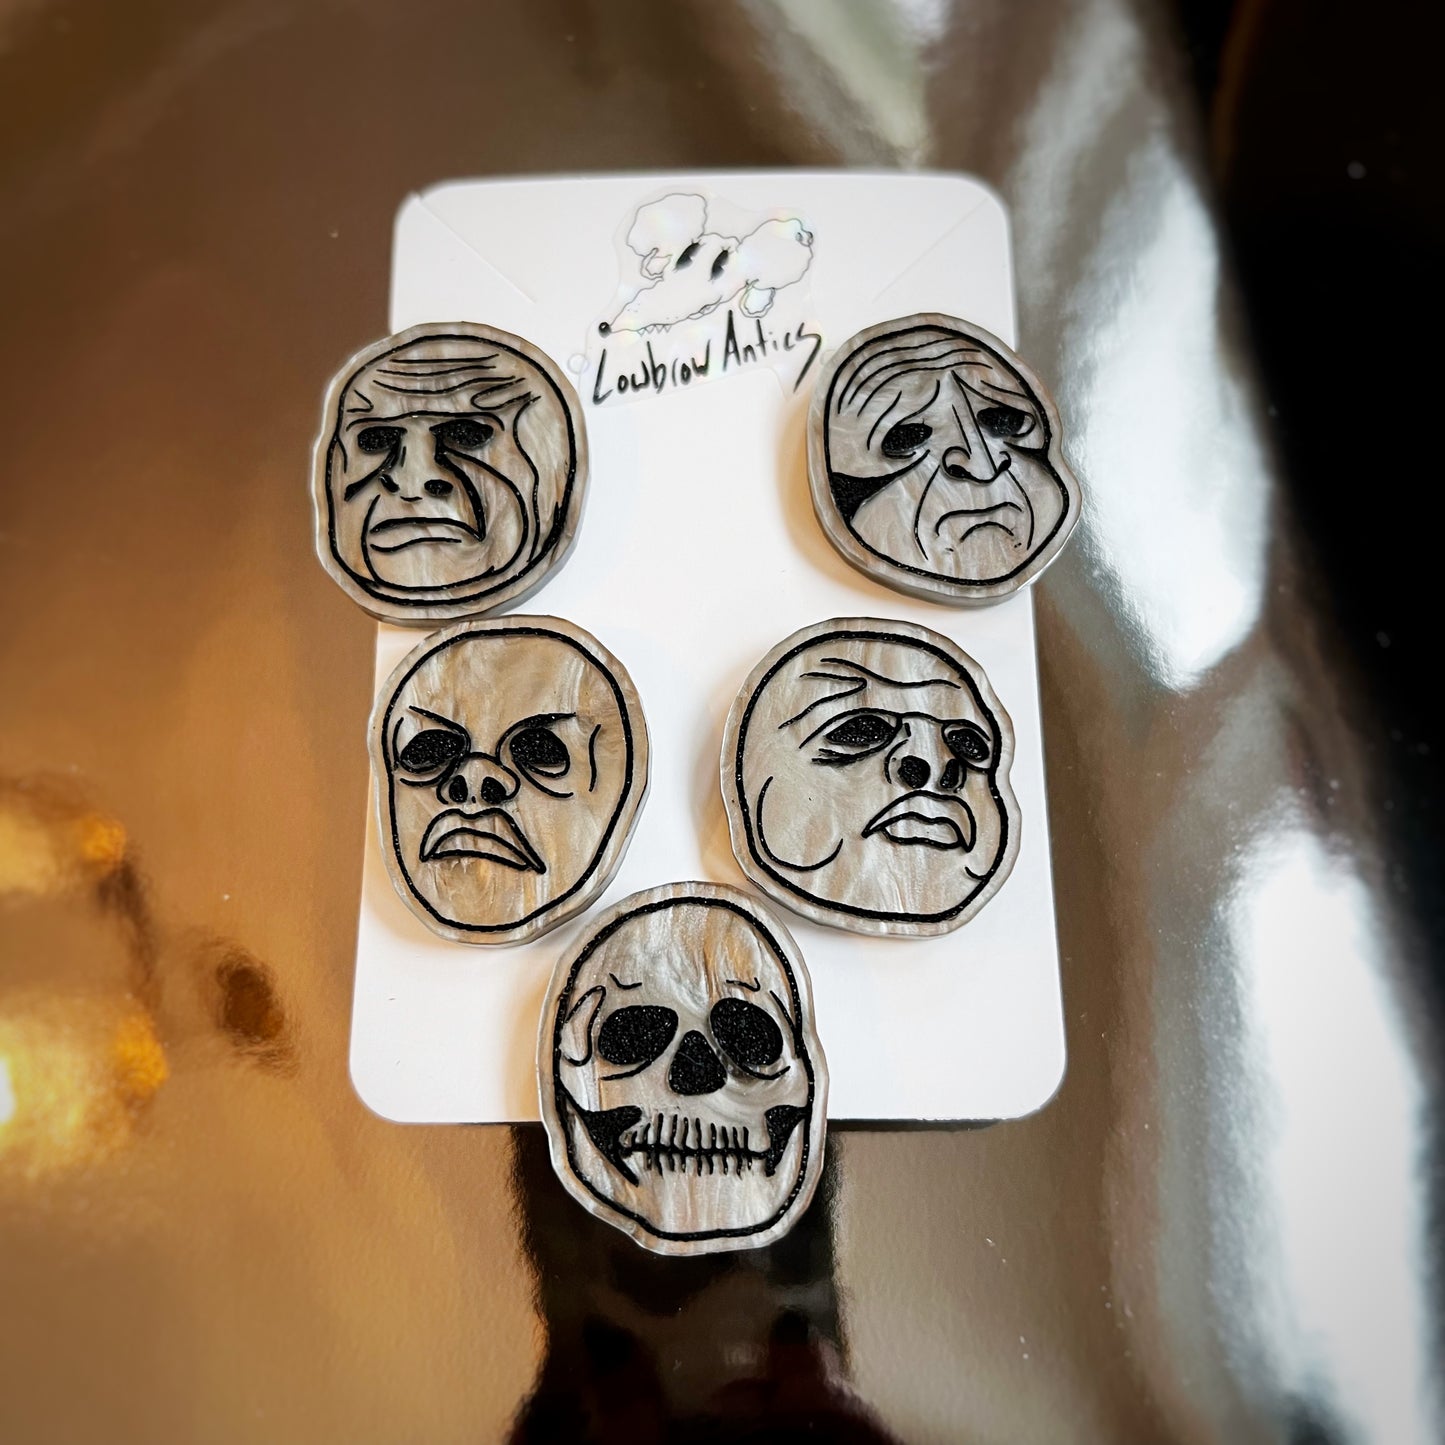 The Masks 5 Pin Set (Twilight Zone Inspired Collection)